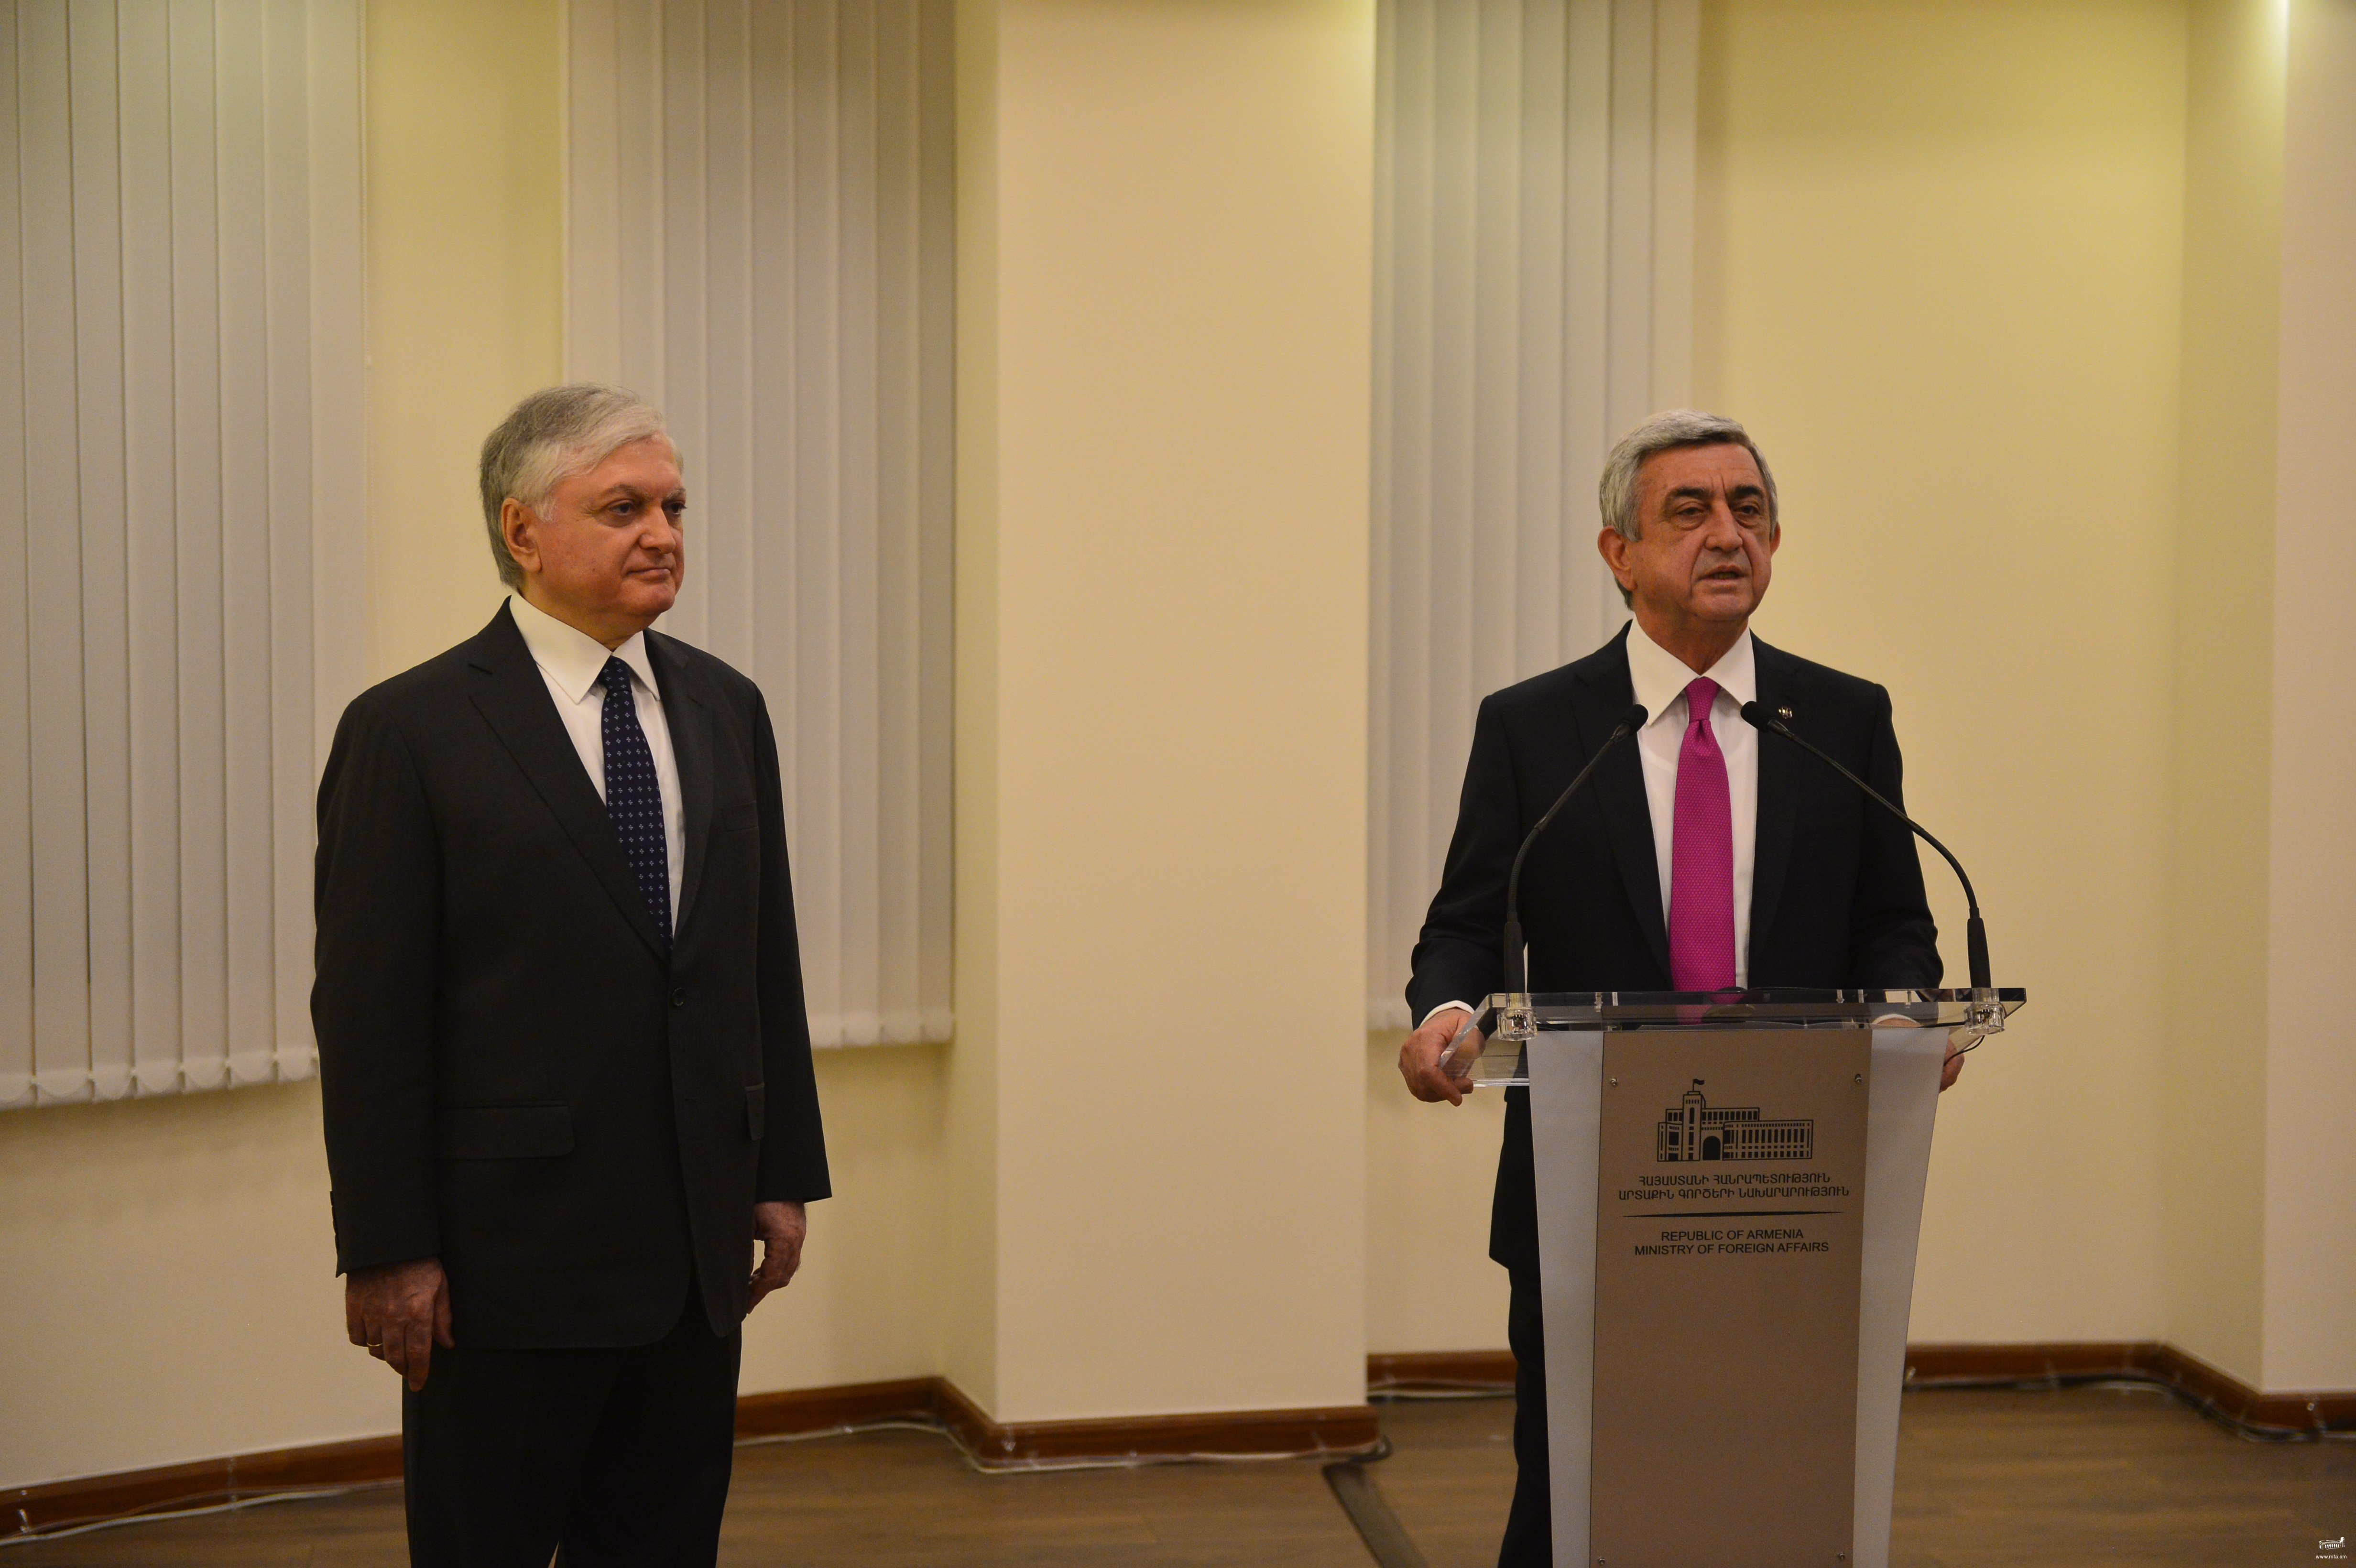 Address of the President of Armenia on the occasion of Diplomat’s Day